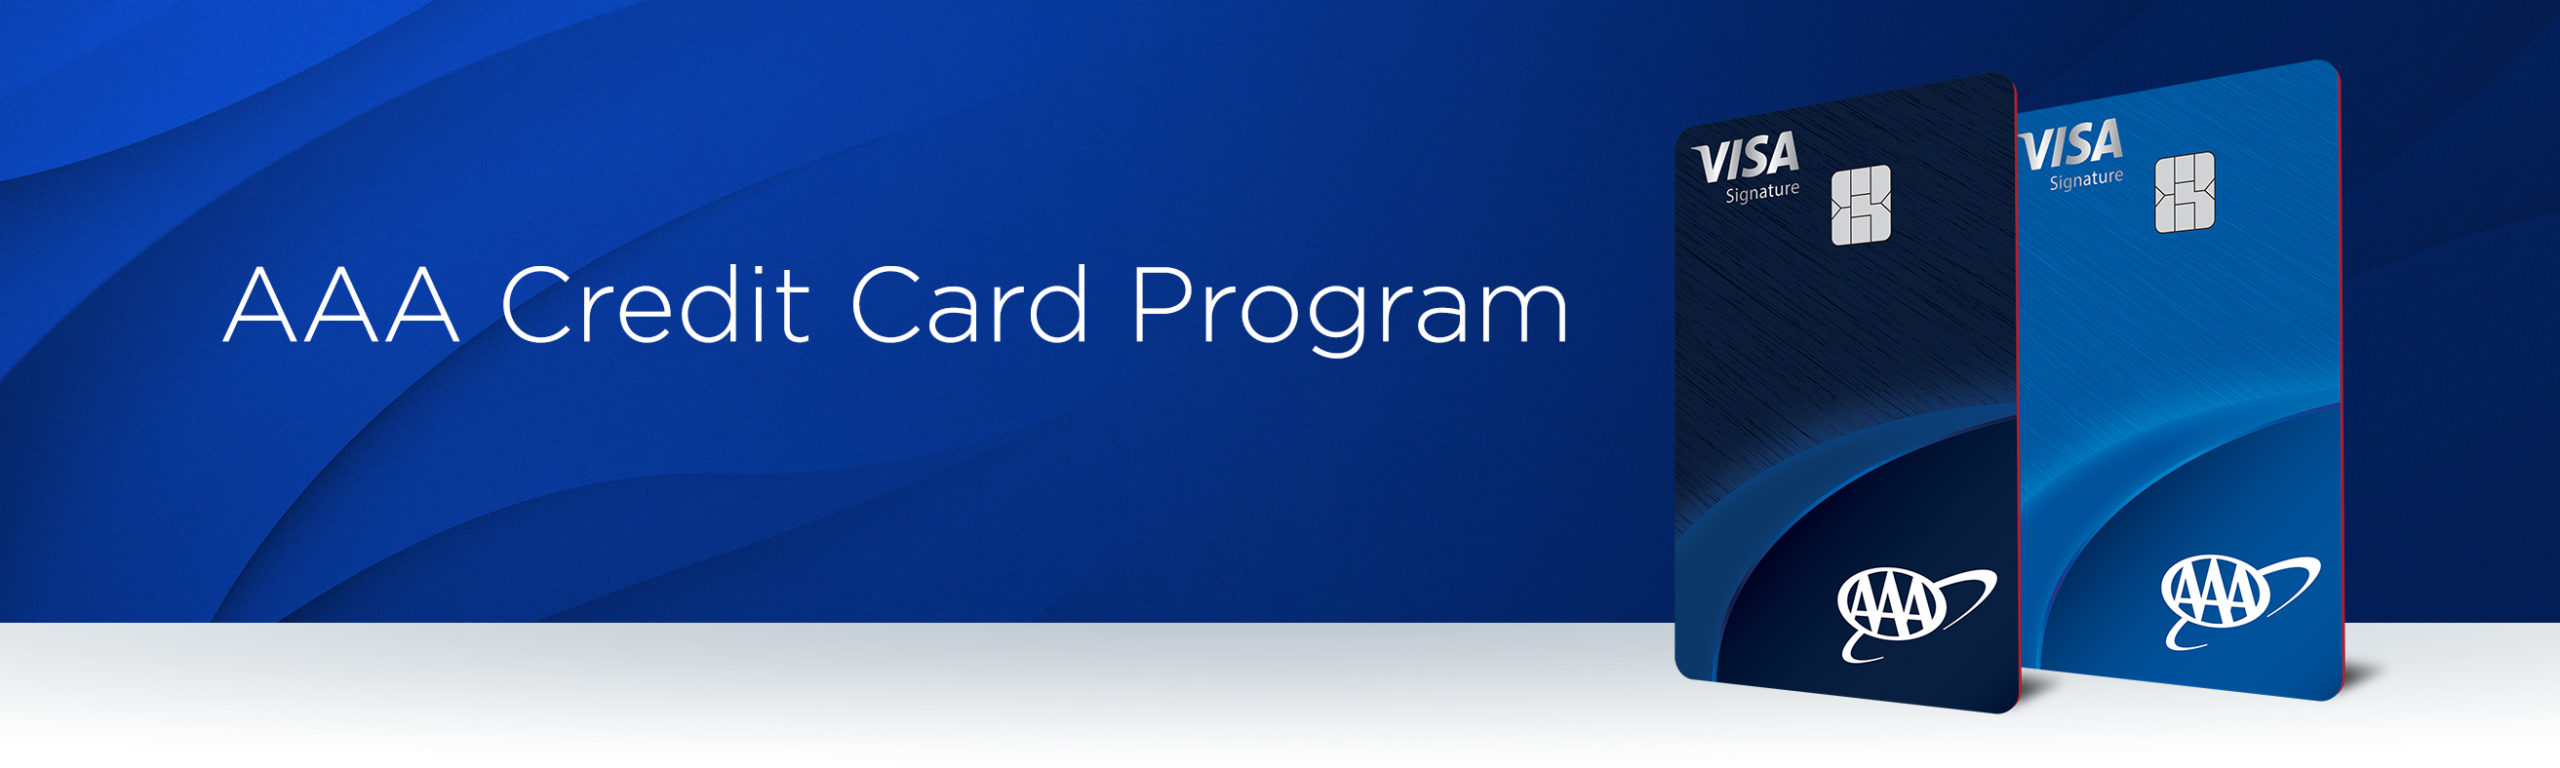 bread-financial-aaa-partner-to-deliver-new-credit-card-program-aaa